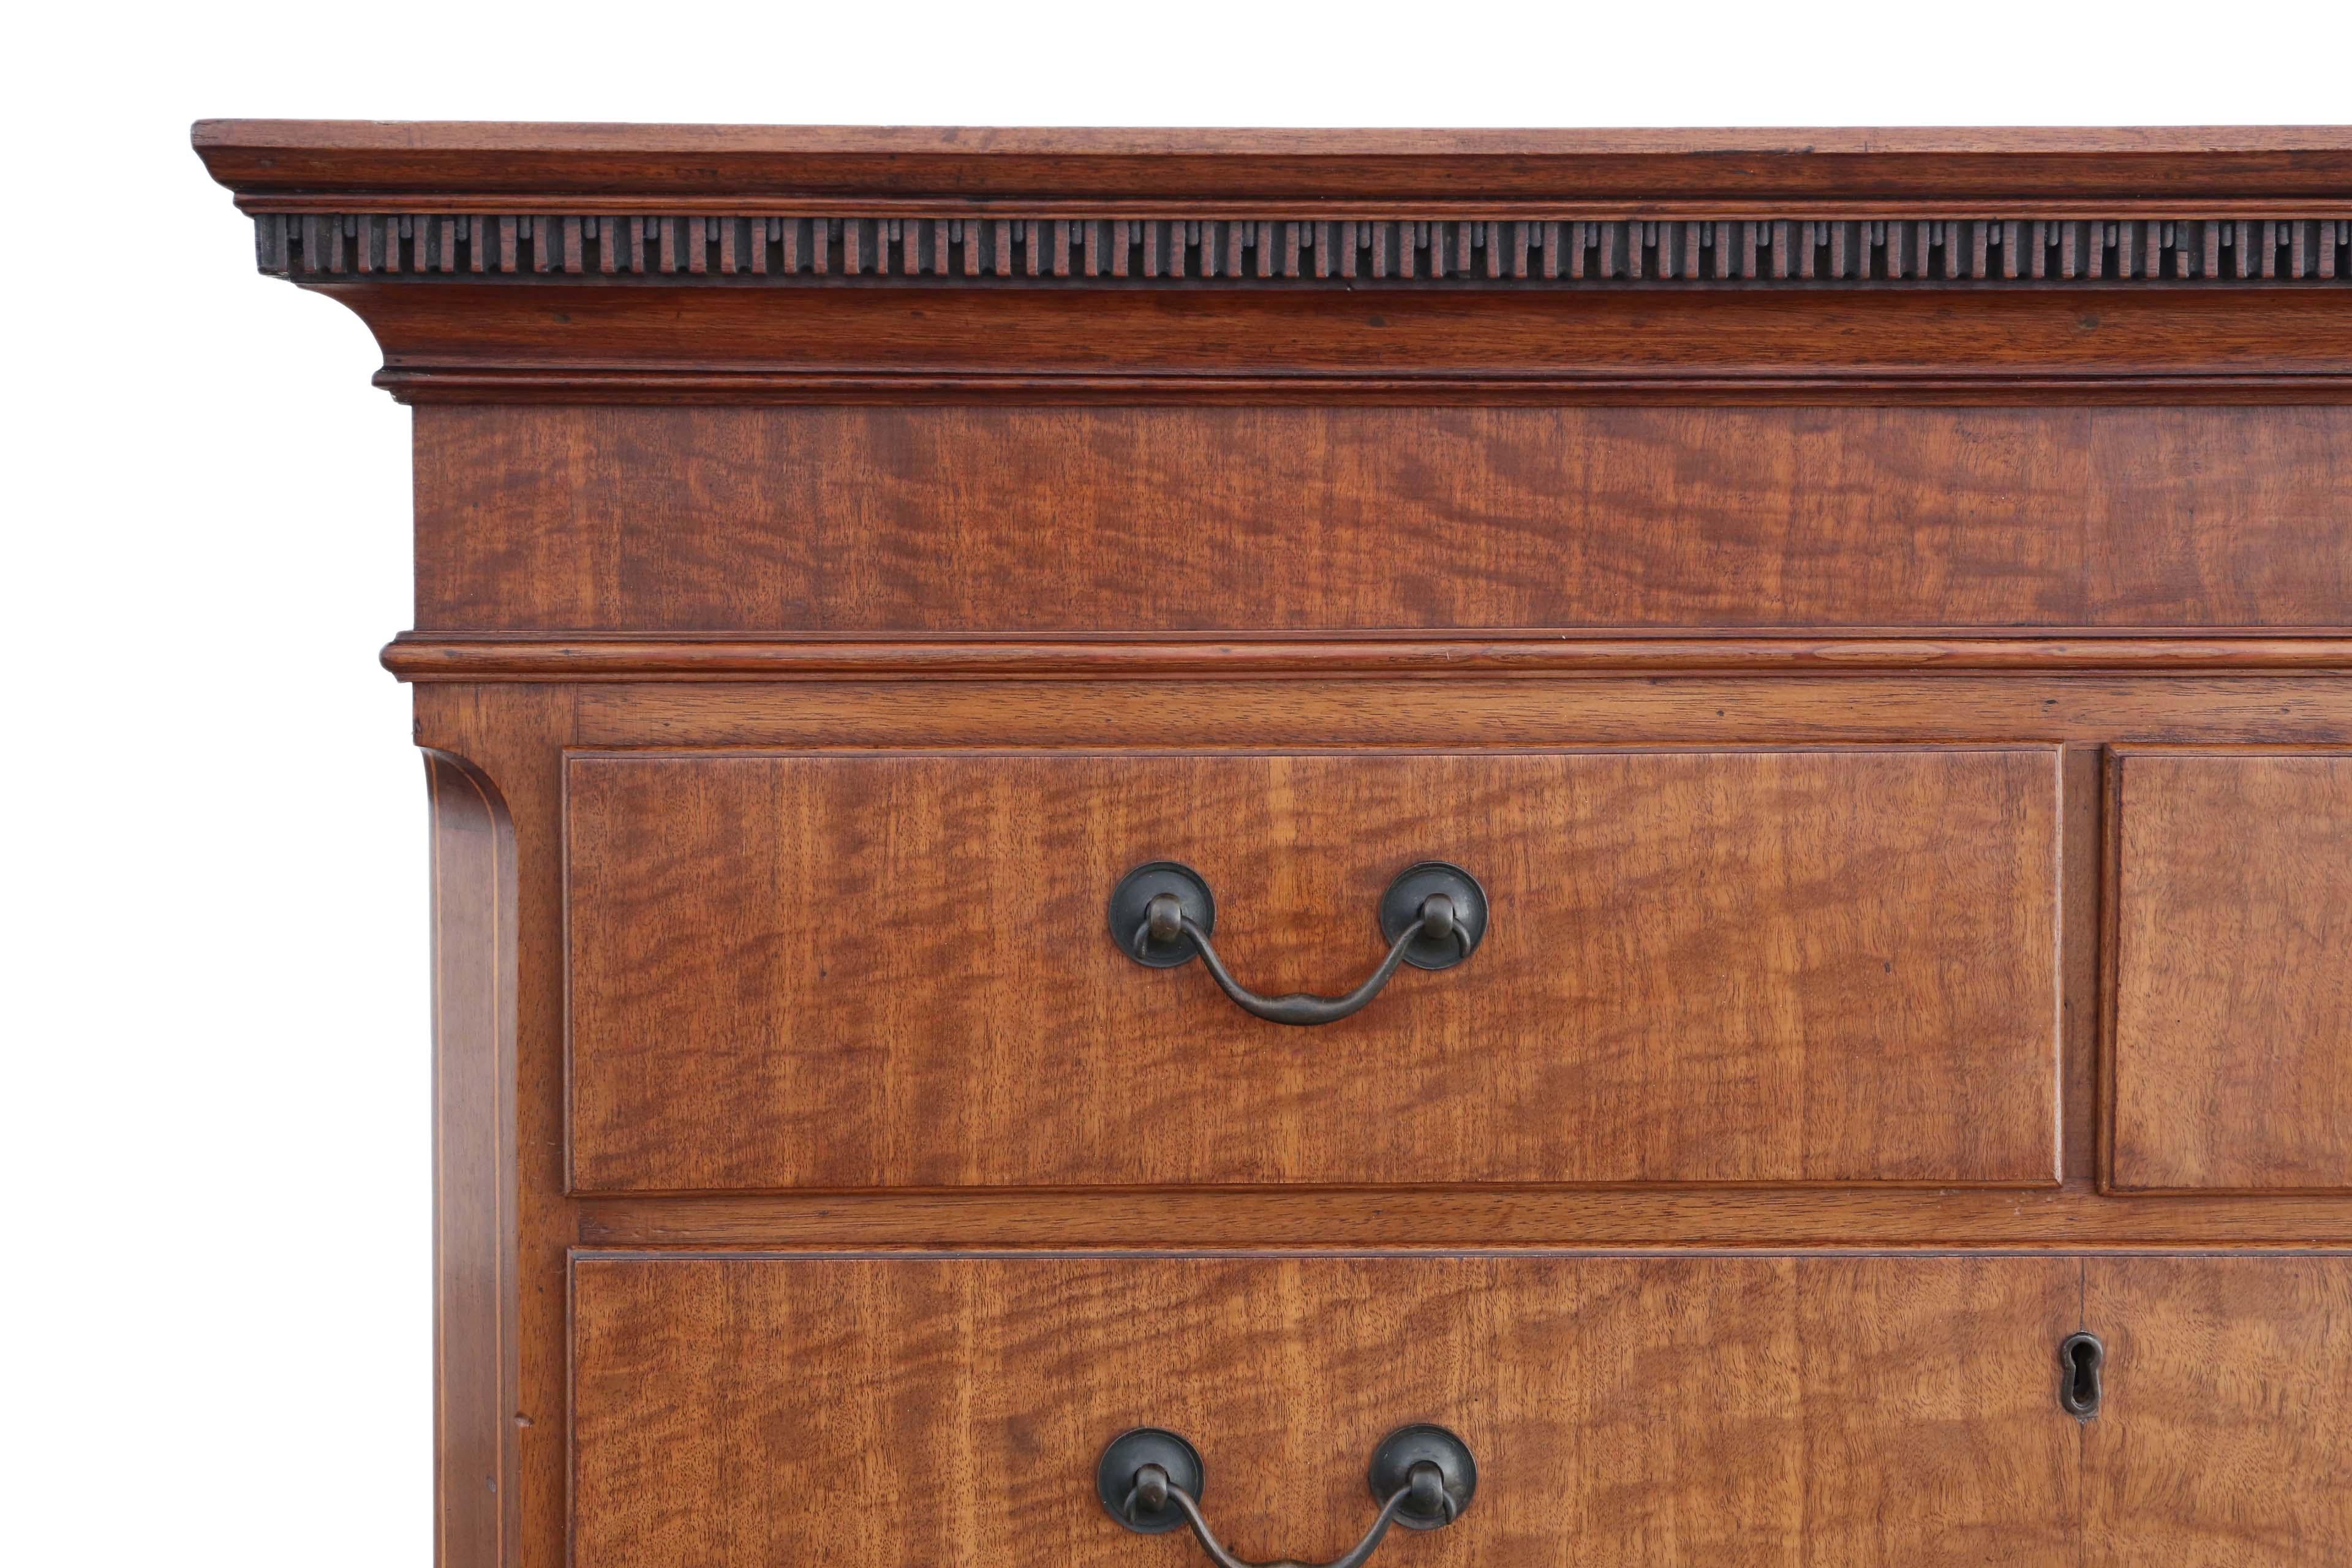 Antique 19th Century Inlaid Mahogany Tallboy Chest on Chest of Drawers In Good Condition For Sale In Wisbech, Cambridgeshire